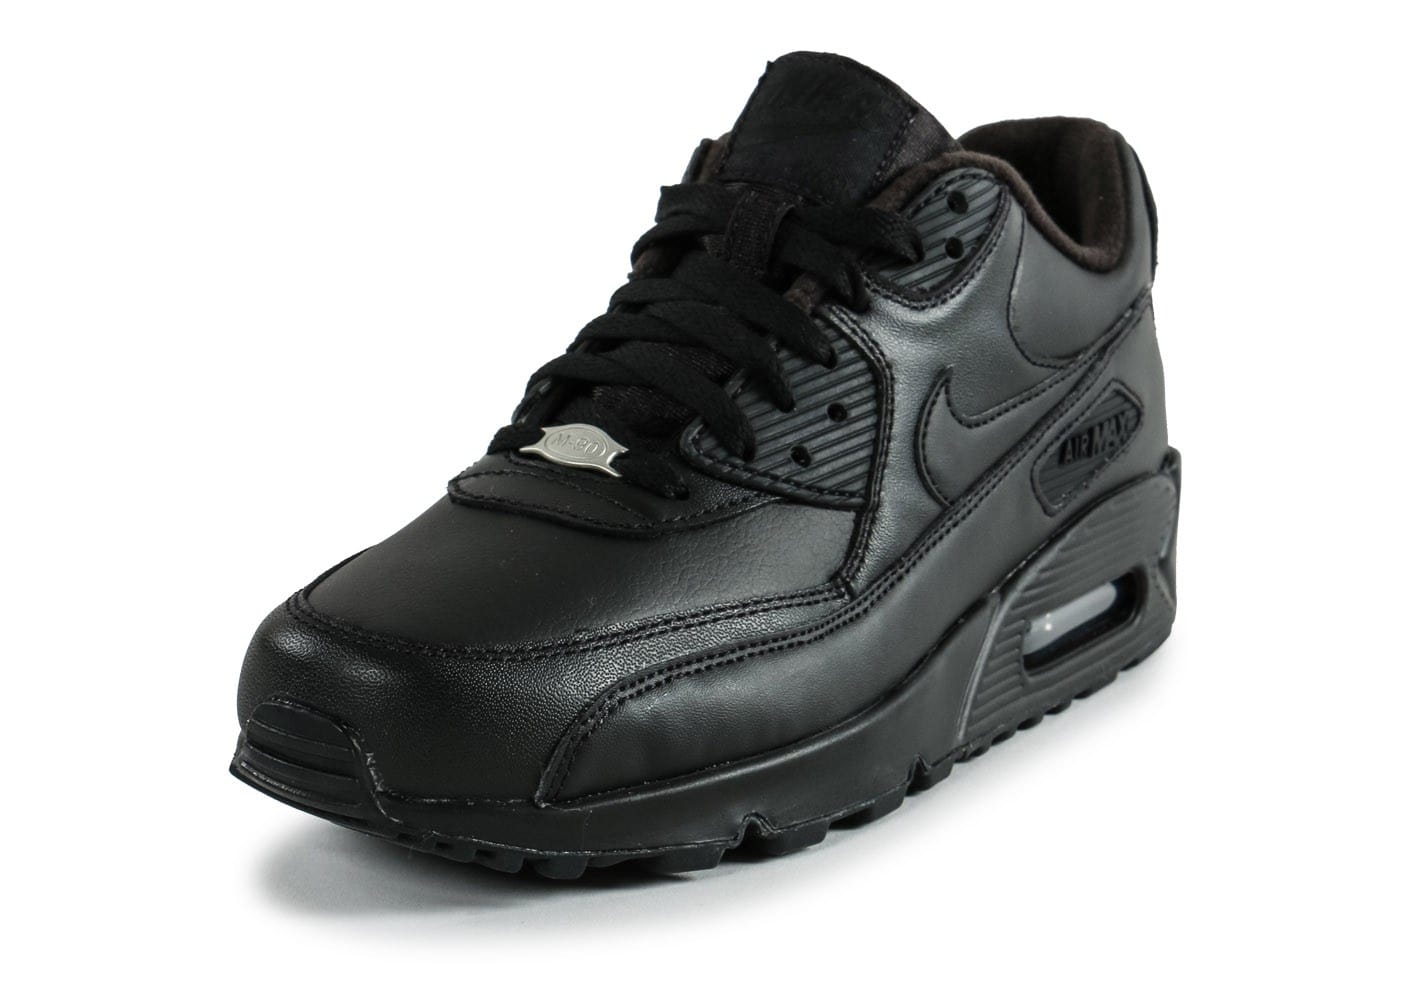 nike air max 90 leather noir homme, ... Chaussures Nike Air Max 90 Leather noire vue dessous ...